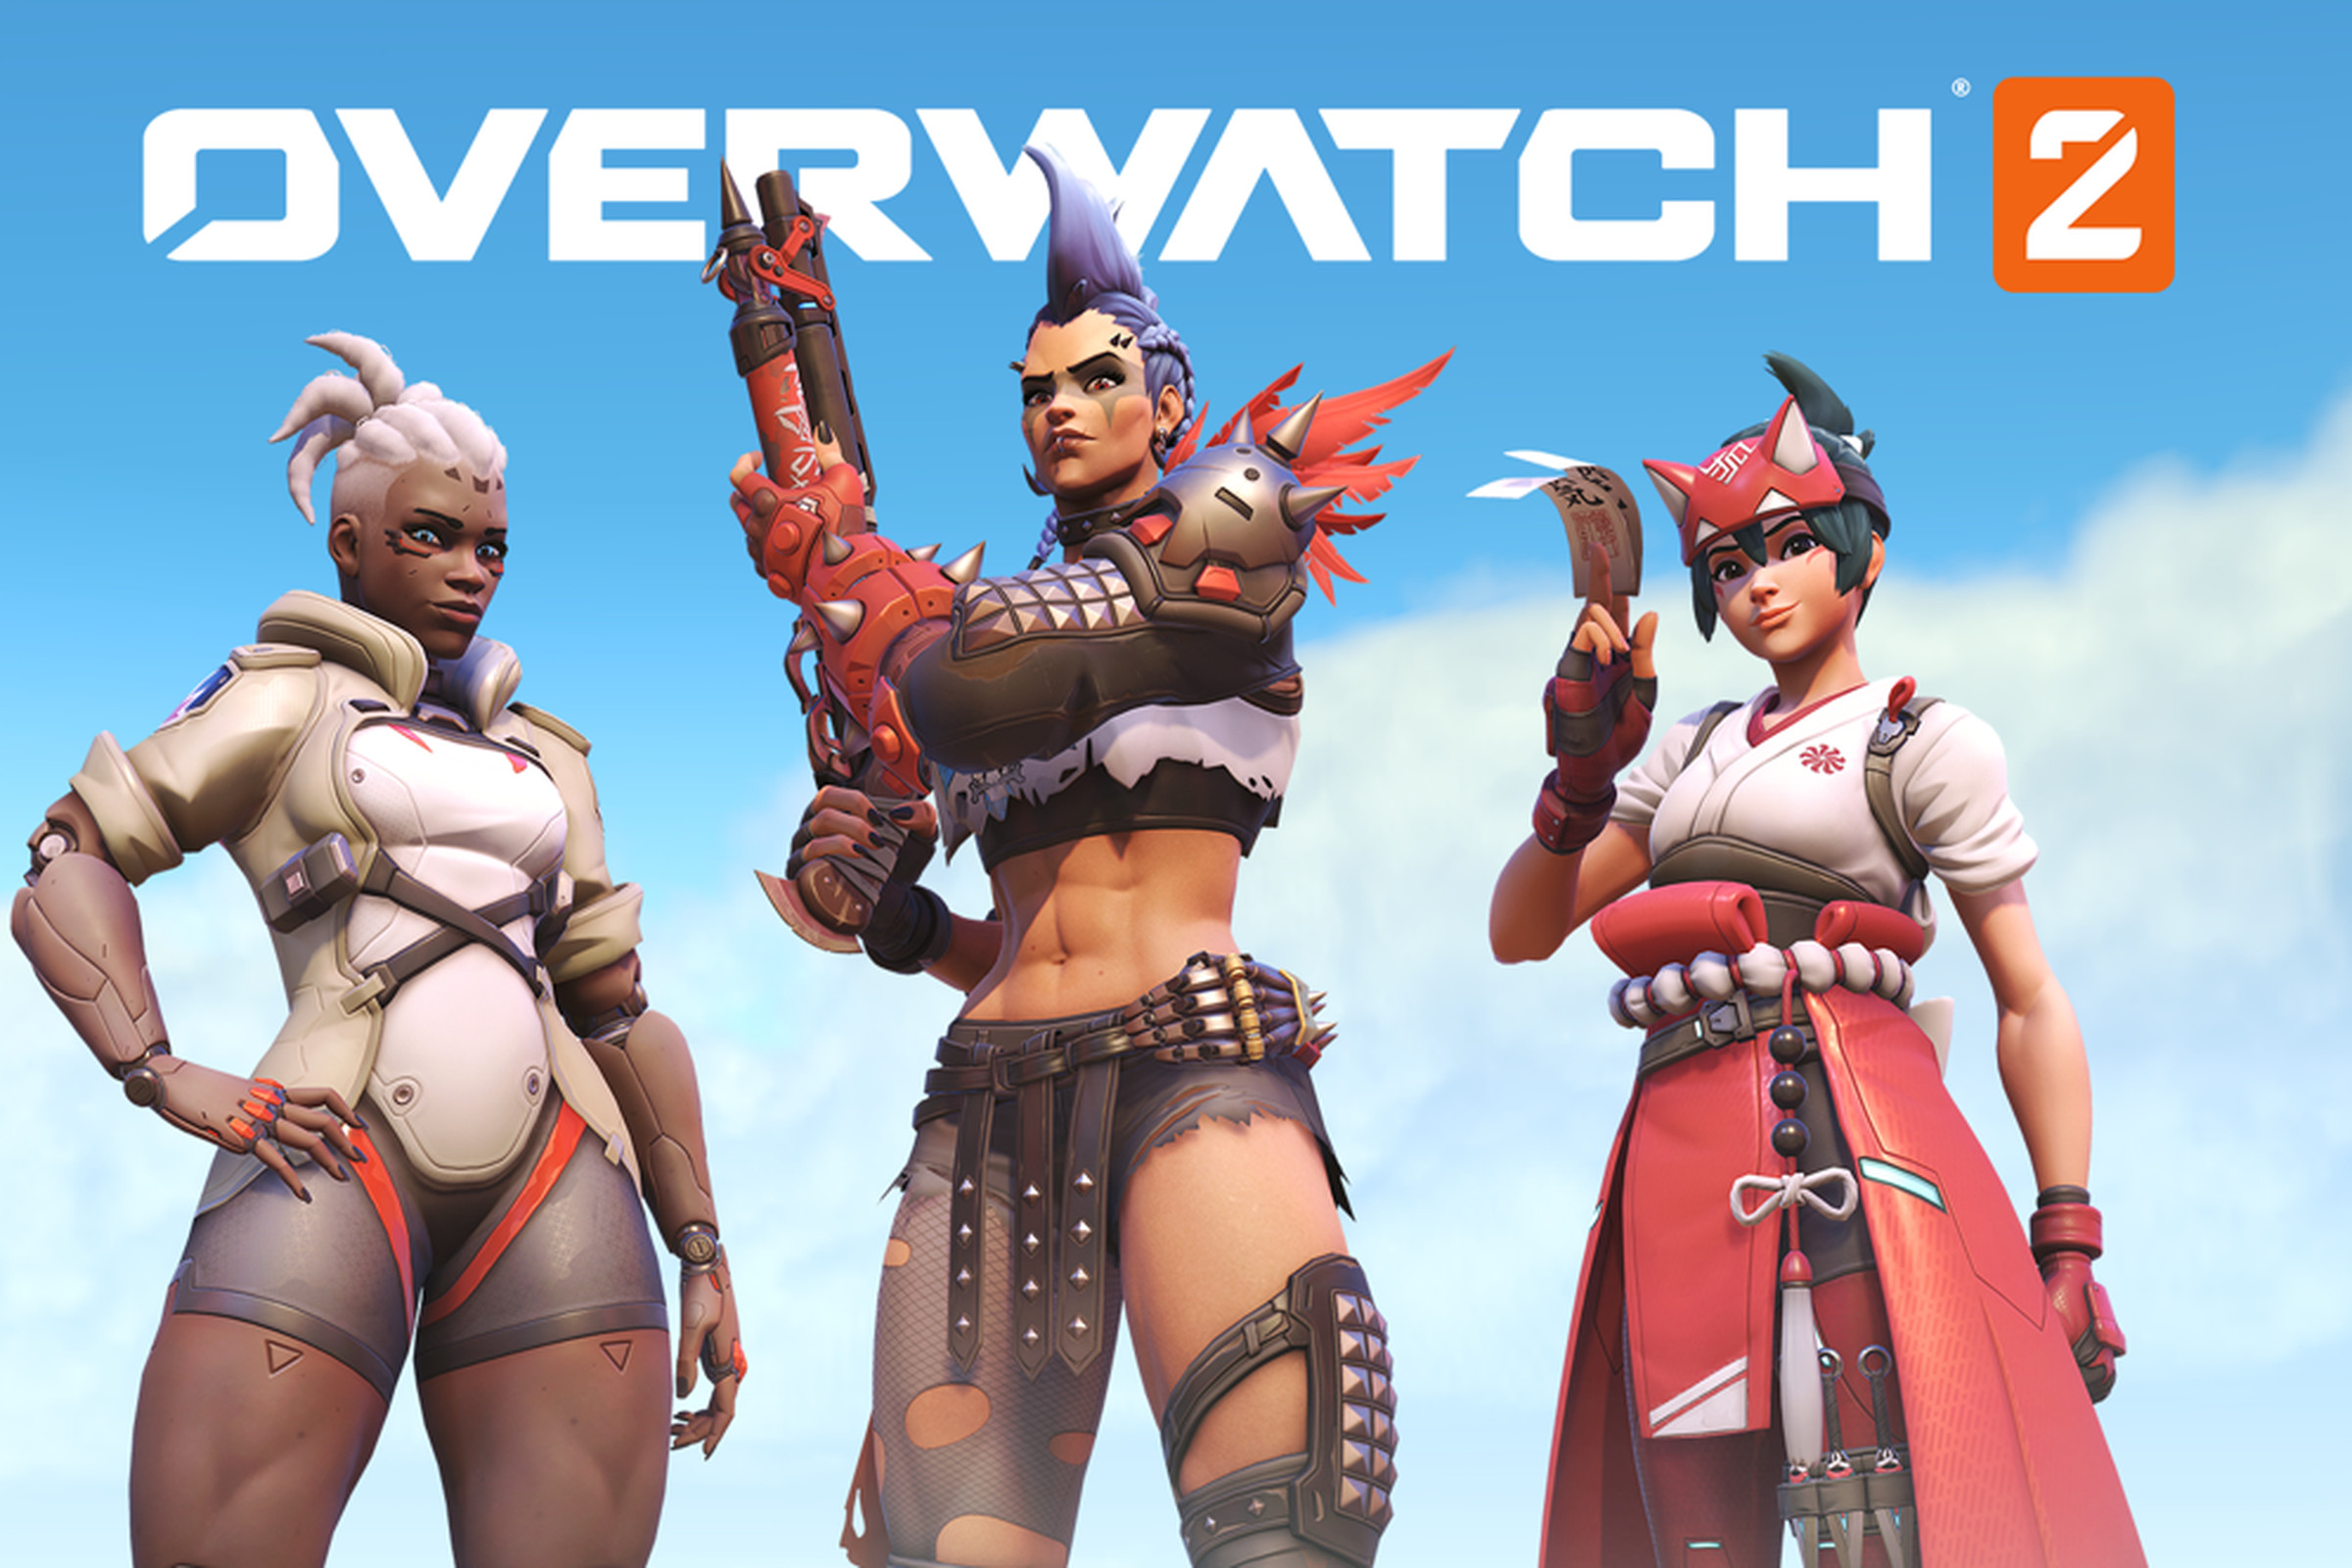 Key Art graphic depicting three new heroes in Overwatch 2 from left to right: Sojourn, an African Canadian dark skinned woman; center is Junker Queen, a tanned and muscular Australian woman with a blue mohawk; rightmost is Kiriko, a Japanese teenage shrine maiden and street vigilante